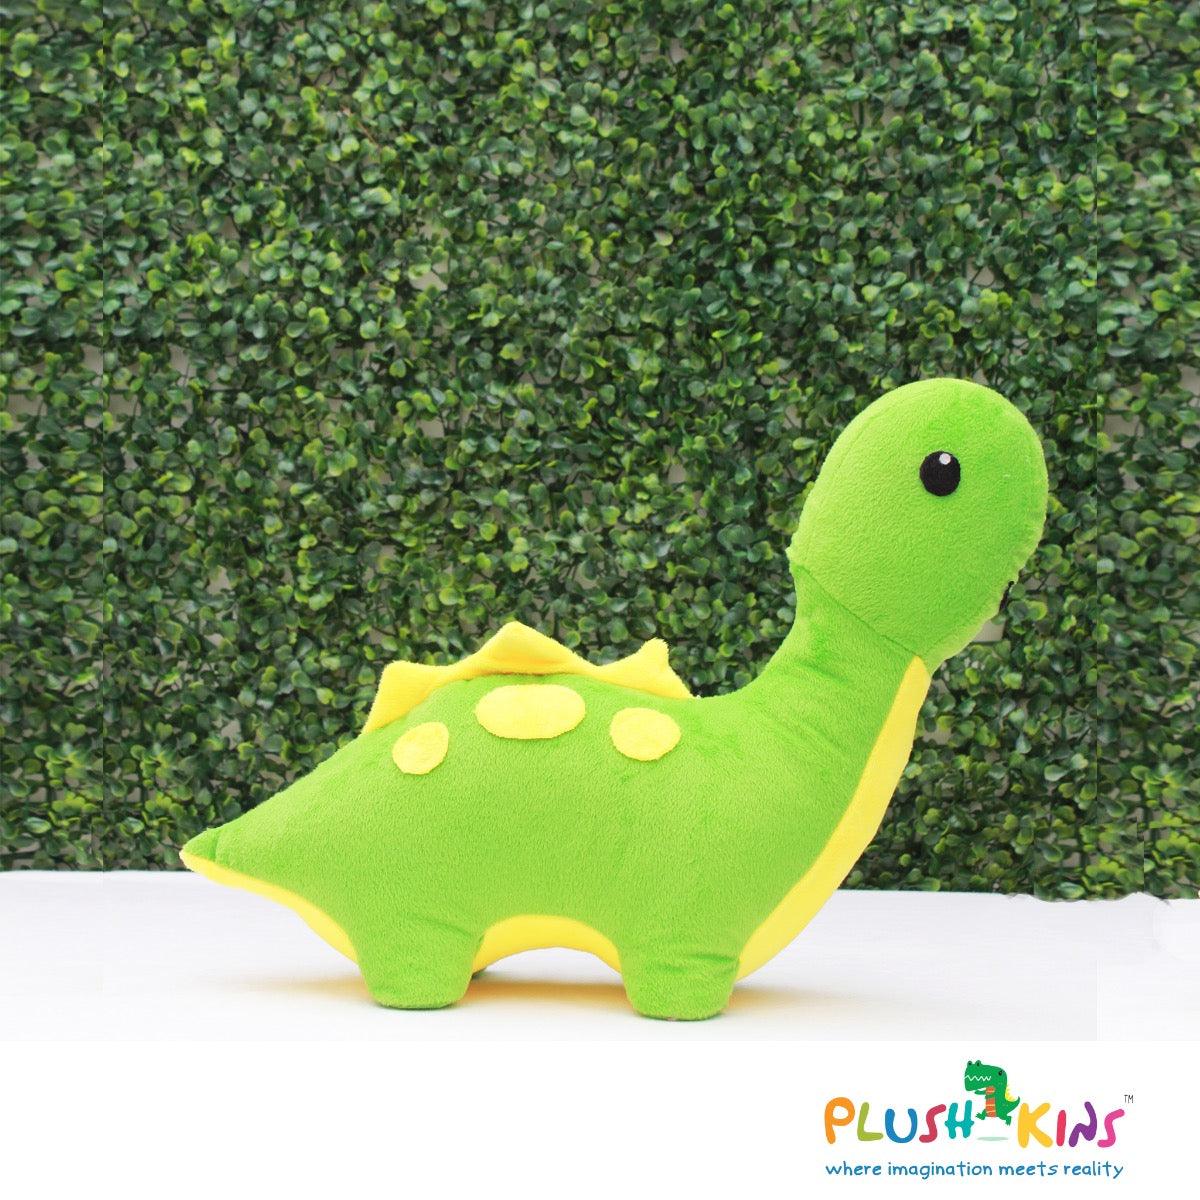 Plushkins Brontosaurus, Premium Green & Yellow Soft Toy for Kids, Aged 1-10 years, Extra Soft Stuffed Toy with Plyfibre Stuffing